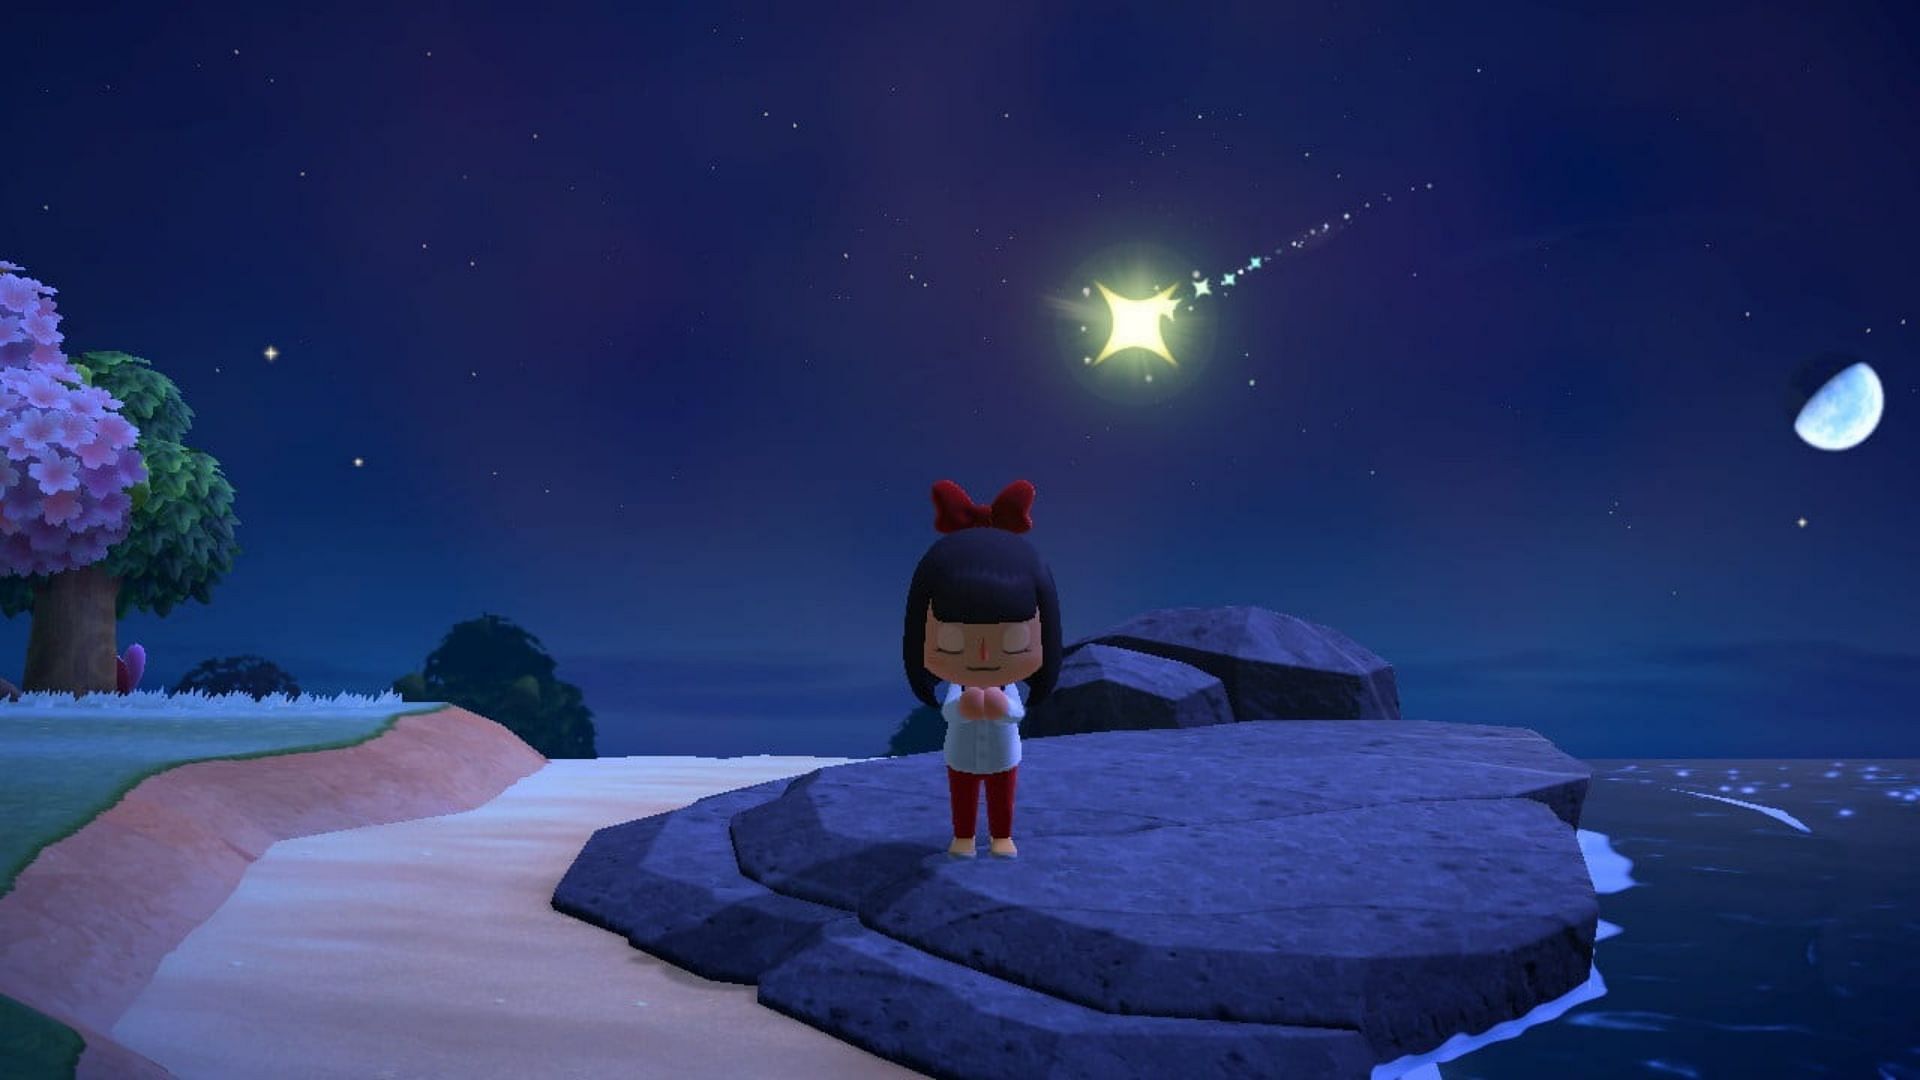 Animal Crossing: New Horizons players can witness meteor showers in the game (Image via Indiana University Blogs)